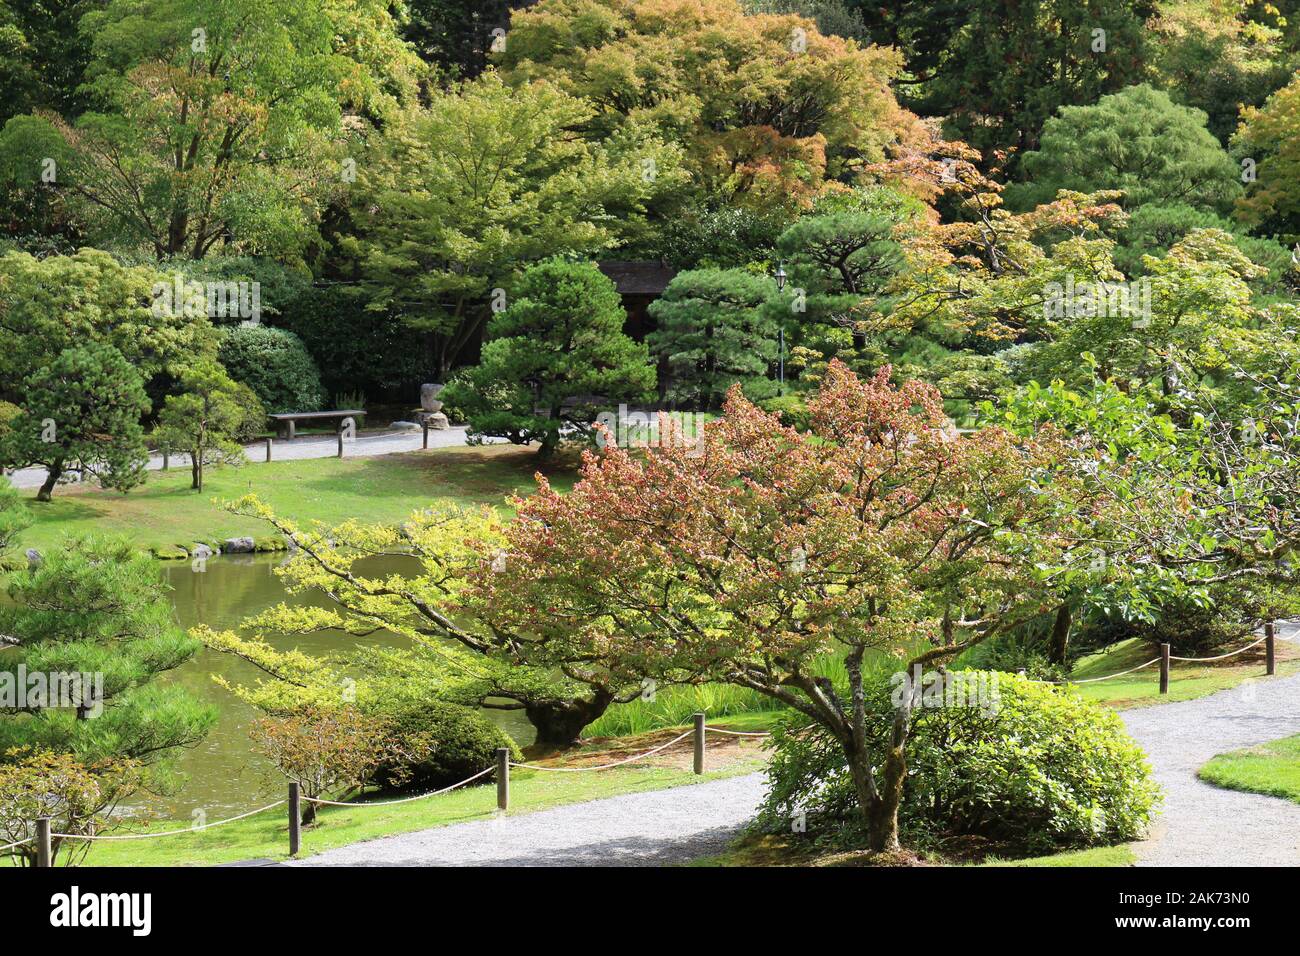 A variety of Japanese Maple trees, evergreen trees, a pond and walking paths in a Japanese Garden in Seattle, Washington, USA Stock Photo